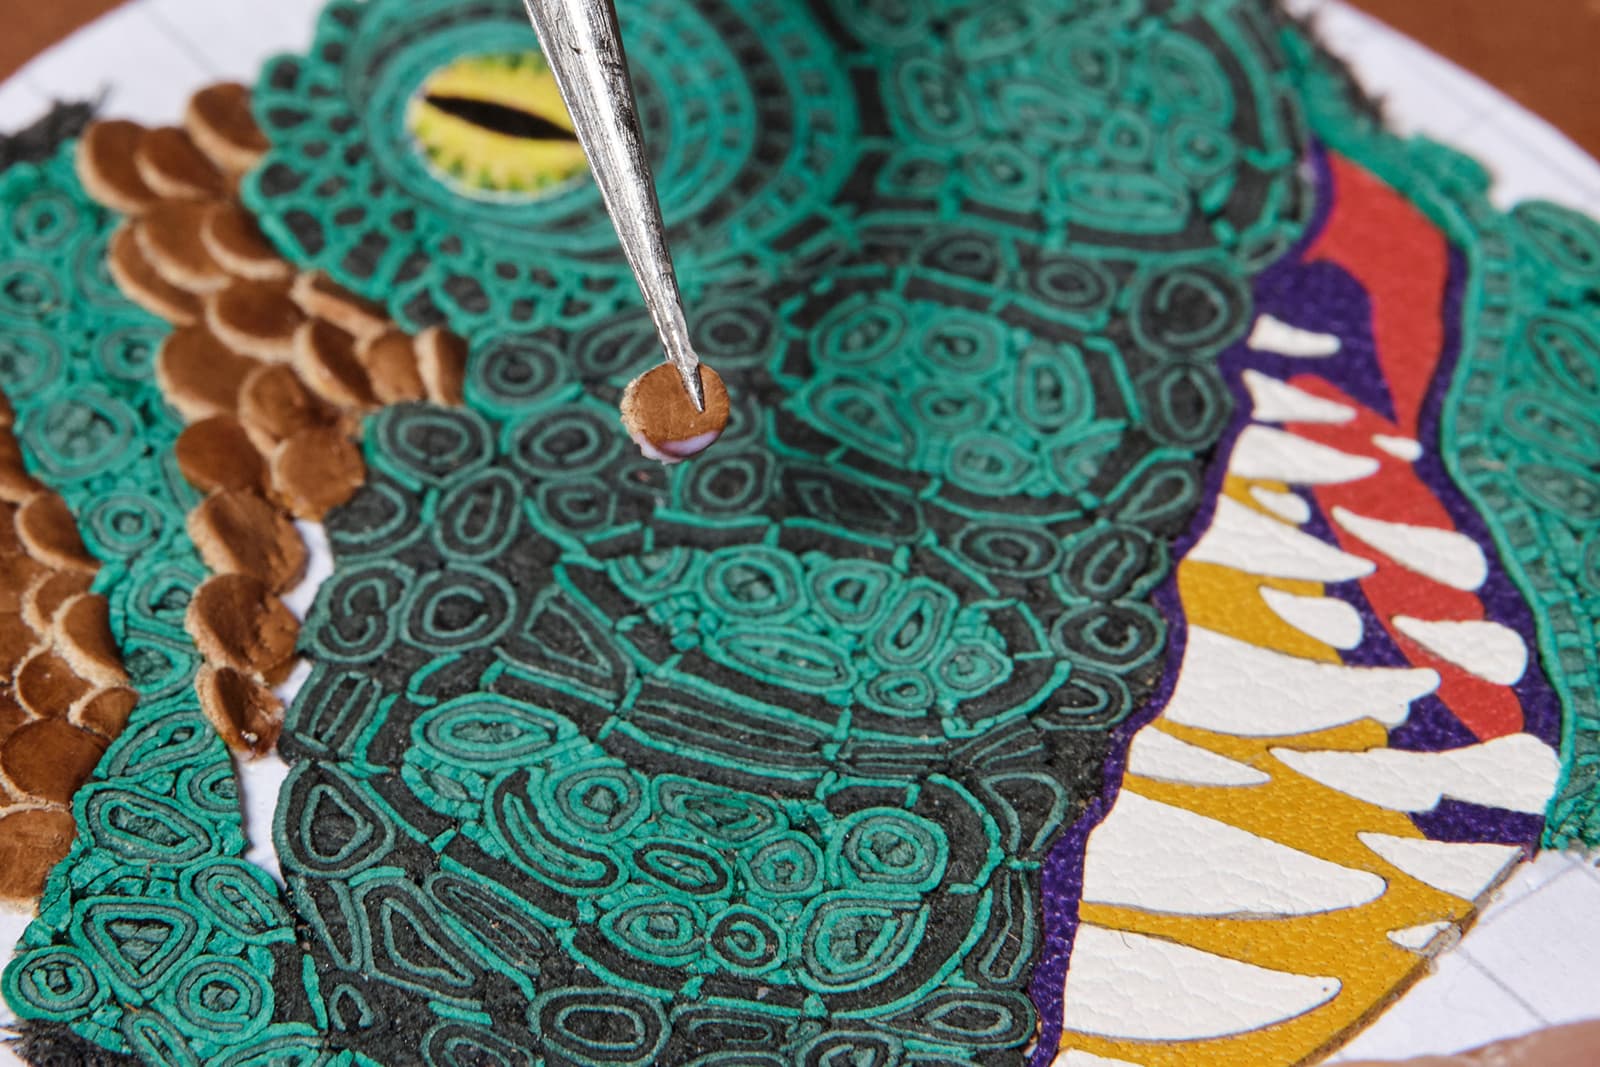 The dinosaur's gnarly scales and razor-sharp teeth have been “painted” in leather mosaic and leather marquetry